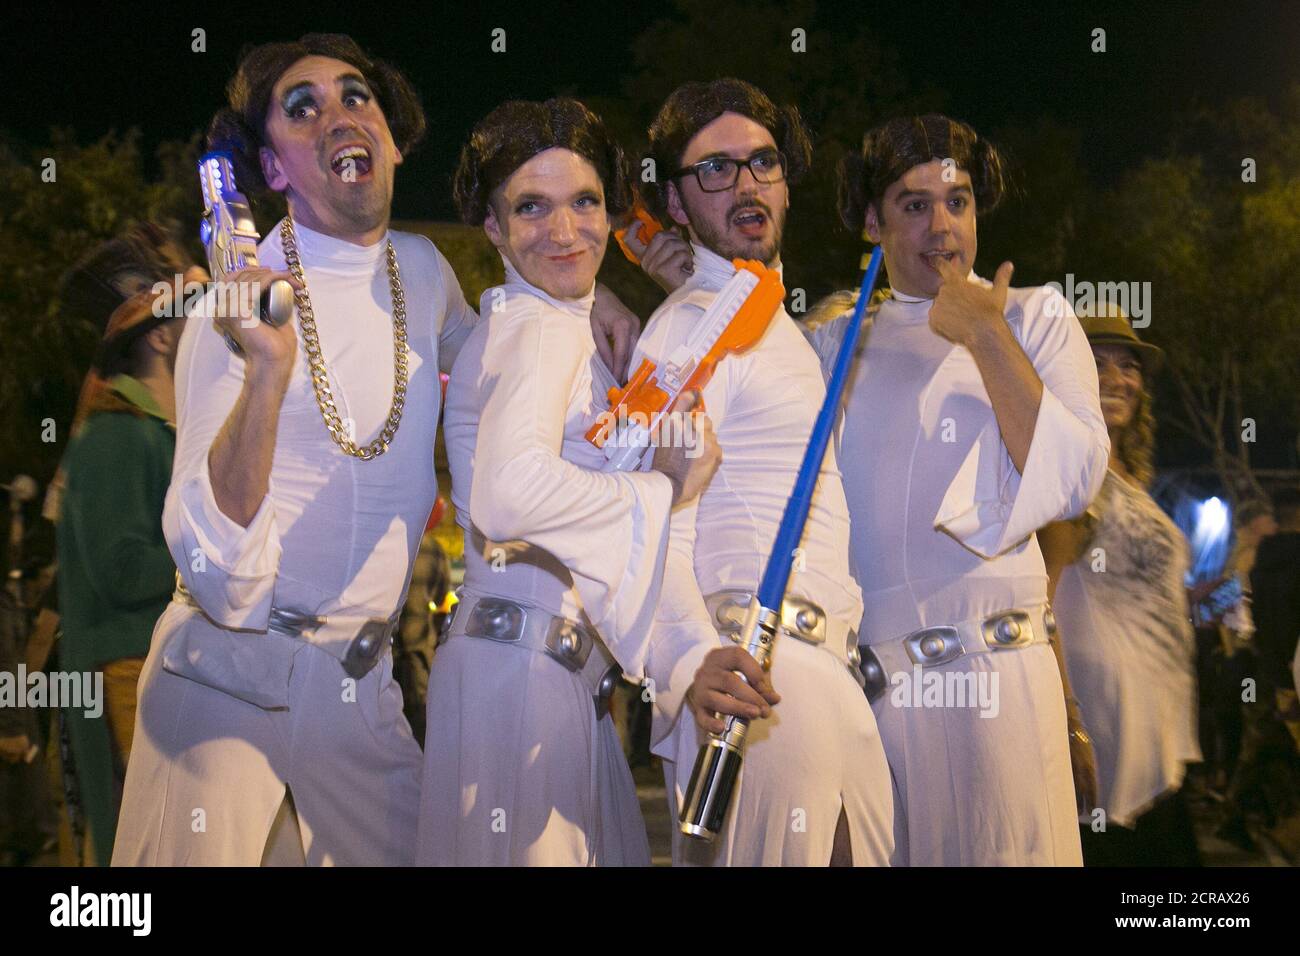 A group men dressed as Star Wars character Princess Leia pose at the West Hollywood Halloween Costume Carnaval, which attracts nearly 500,000 people annually, in West California October 31, 2015.